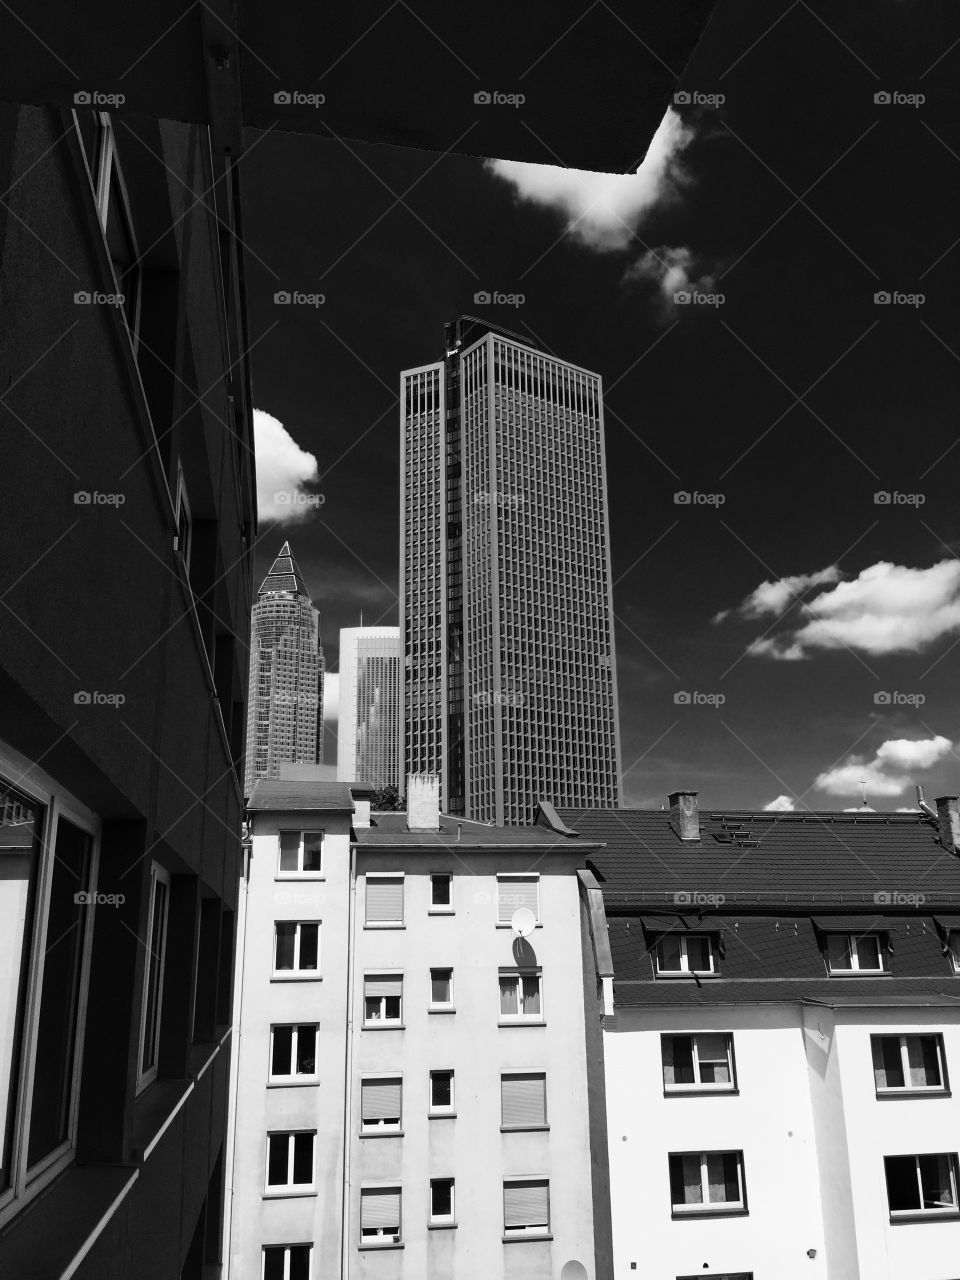 Frankfurt's skyscraper. A very hot day in Frankfurt. I was on the balcony of my friend Simon. So I just took a little snapshot. 